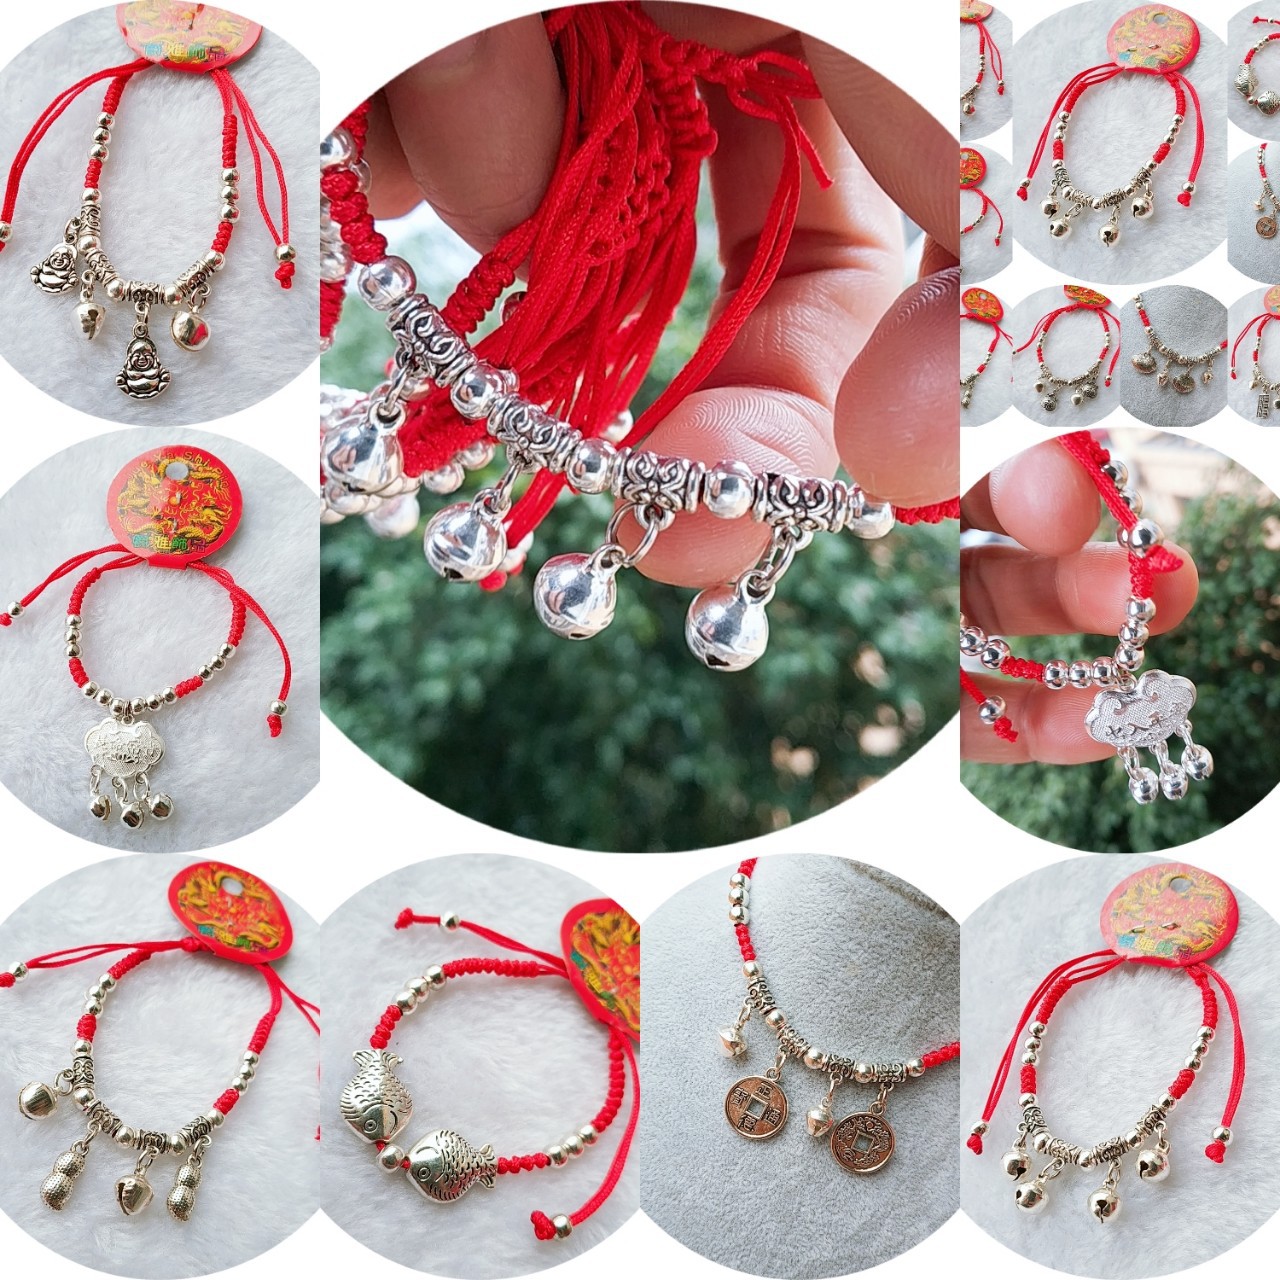 Stall Hot Sale Miao Silver Red Rope Woven Bracelet Miao Silver Anklet Red Rope Woven Alloy Tibetan Silver Bracelet Wholesale